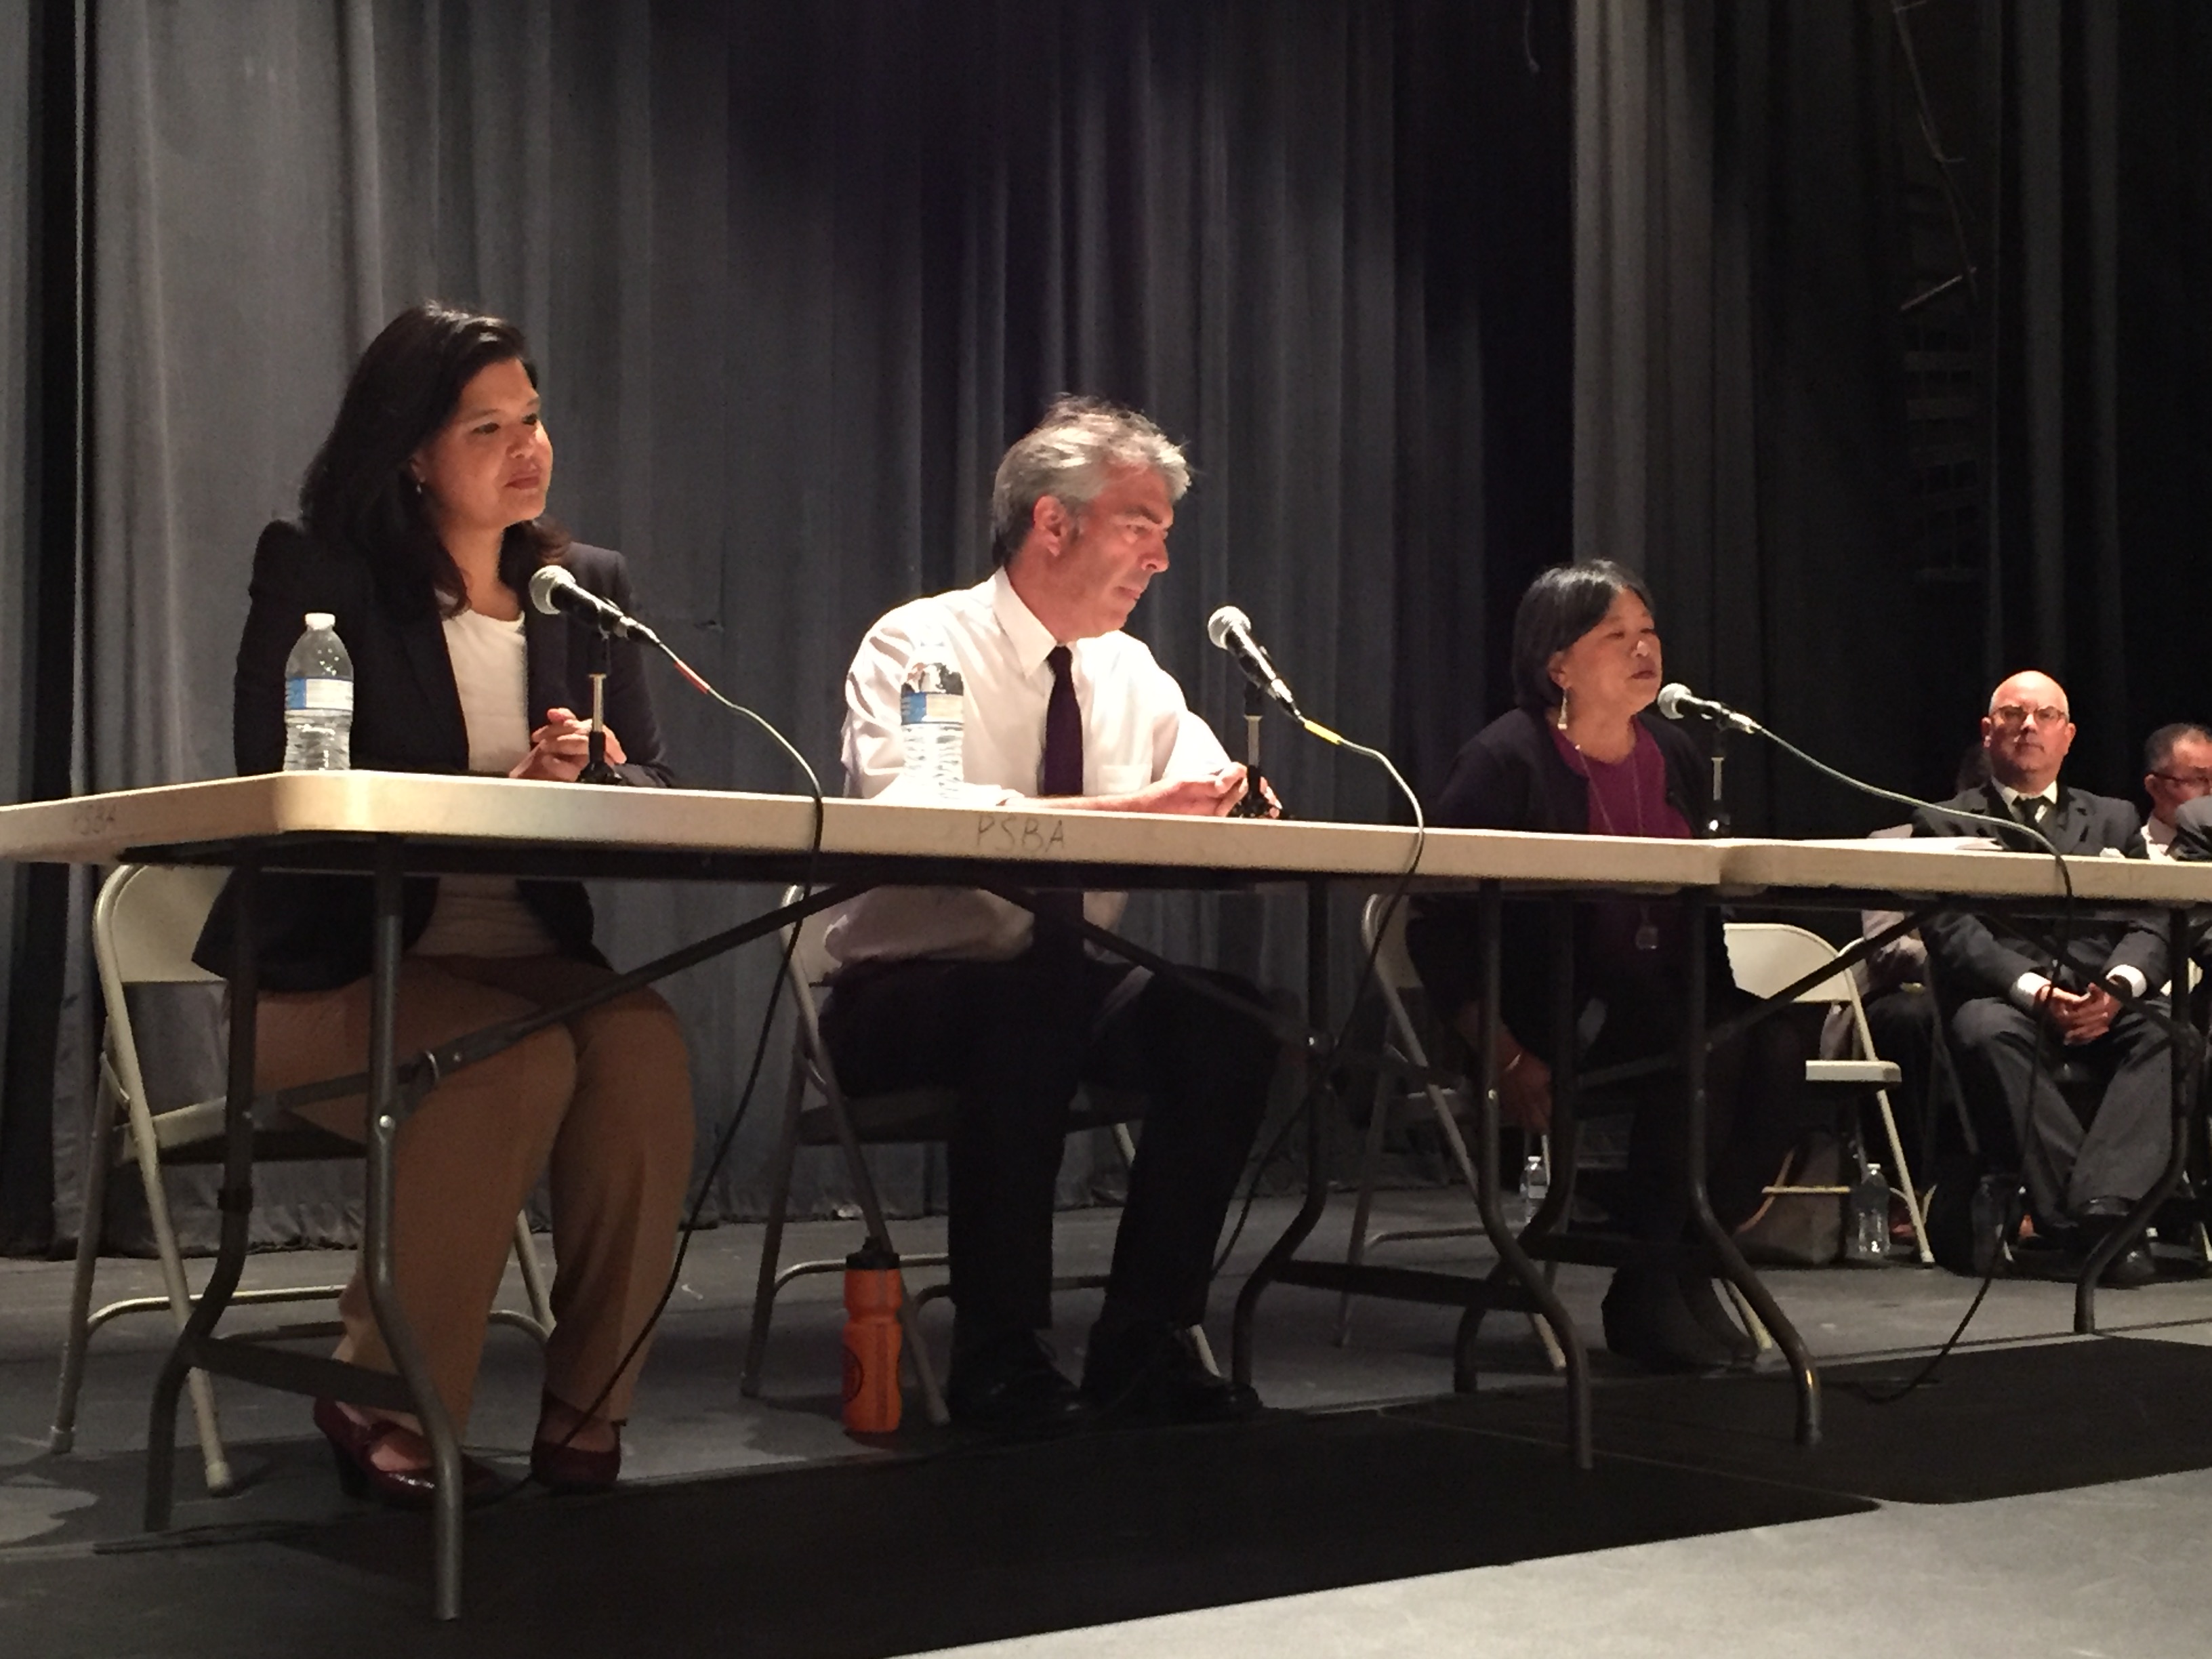 District 1 Supervisor candidates tackle the issue of housing at Wednesday night's debate. L to R: Marjan Philhour, Andy Thornley and Sandra Fewer